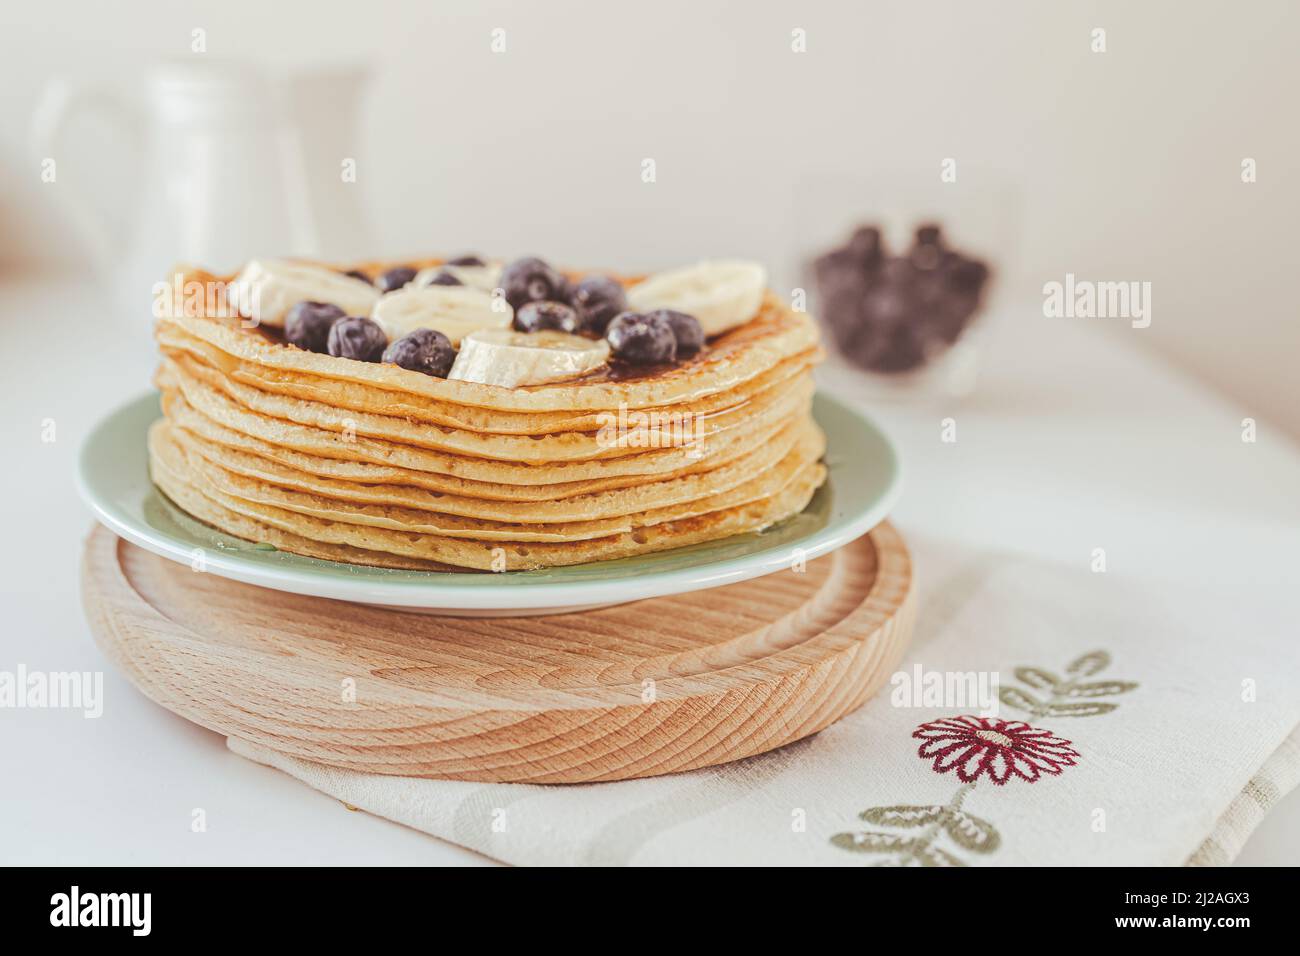 Delicious sweet food dessert pancakes or cornmeal pancakes, diet product, sweet food, holiday baking. Pancakes with fresh blueberries, banana and hone Stock Photo